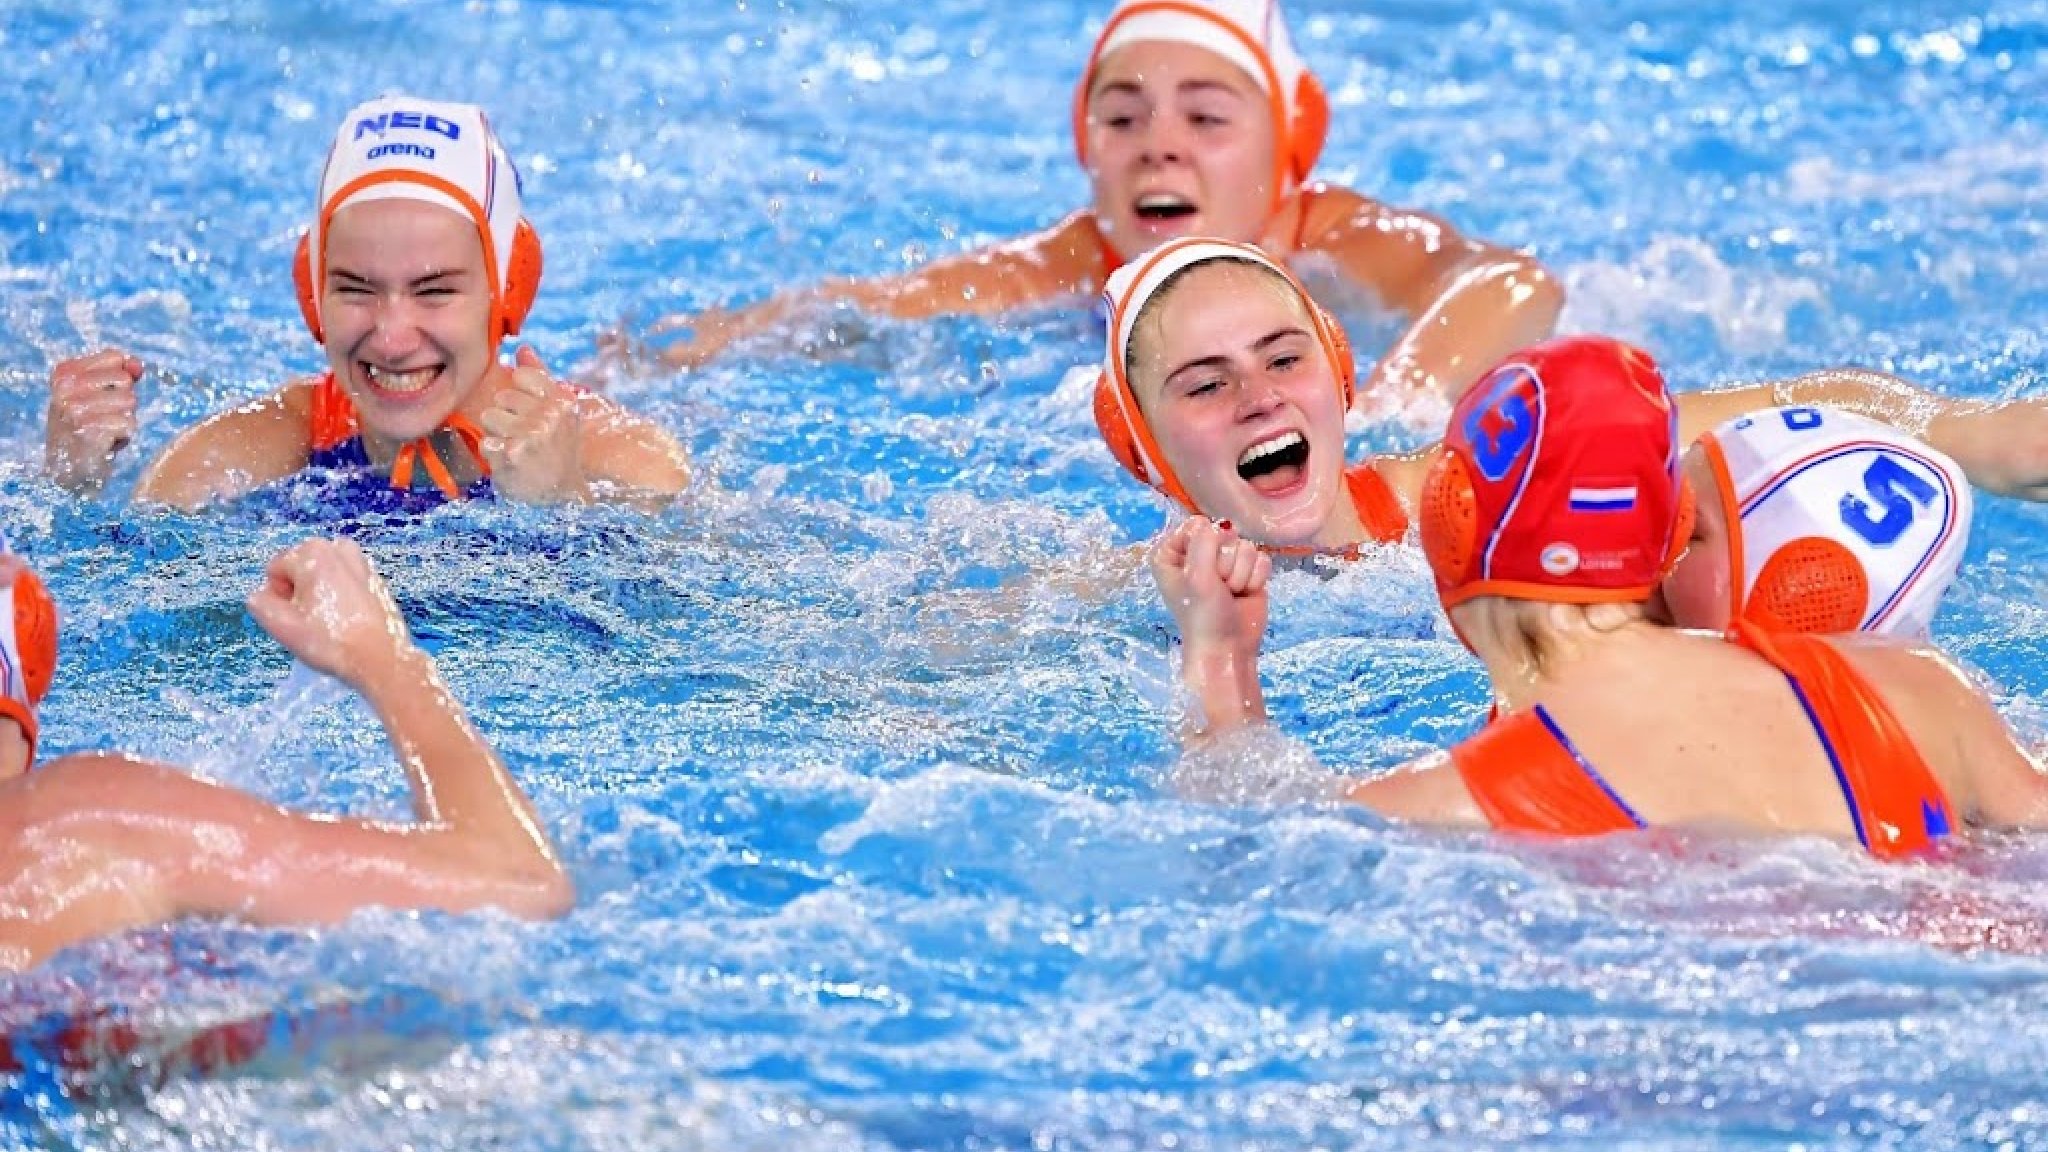 For water polo players, the games really start now